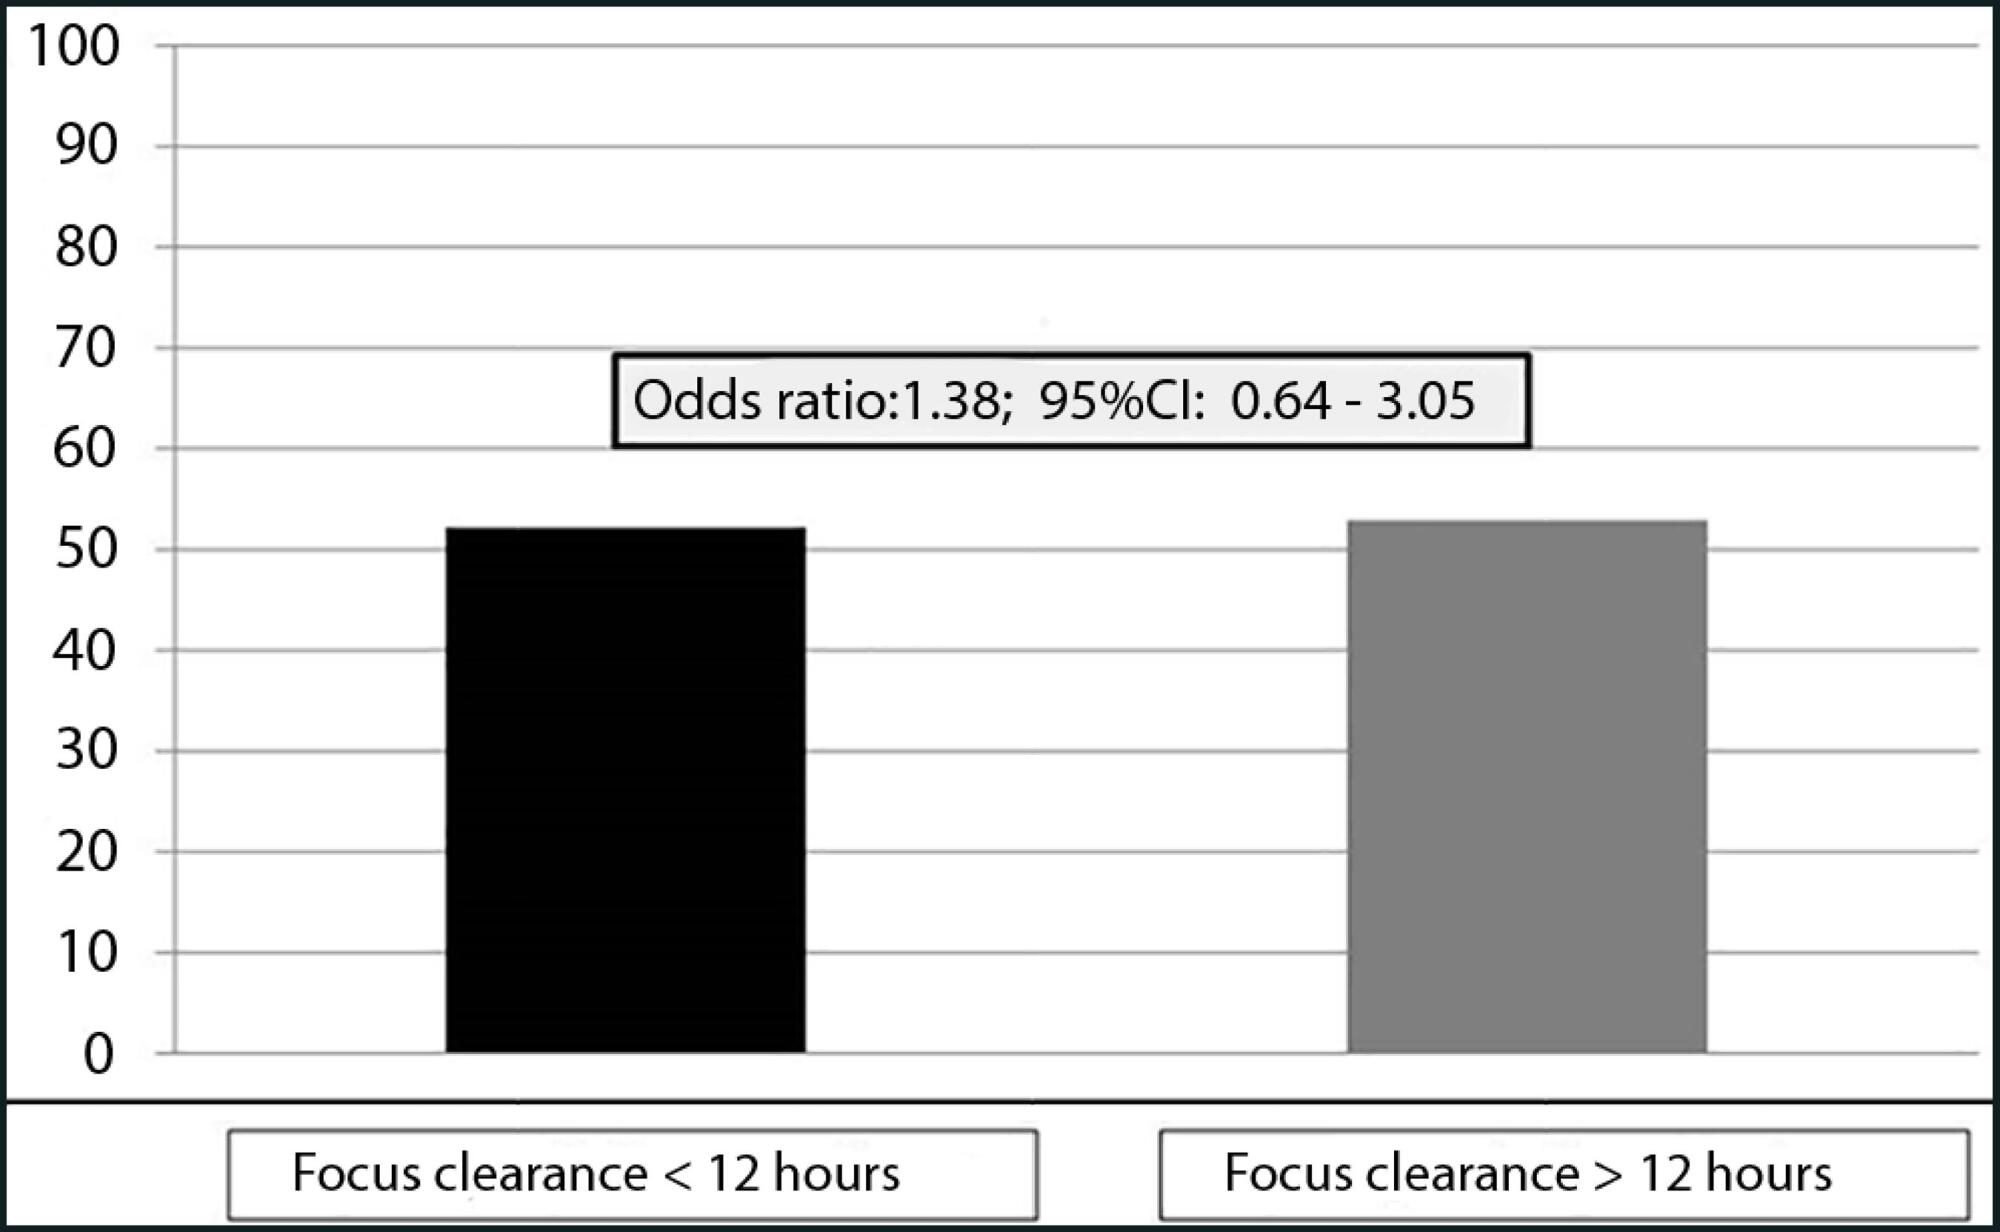 Time to clearance of abdominal septic focus and mortality in patients with sepsis